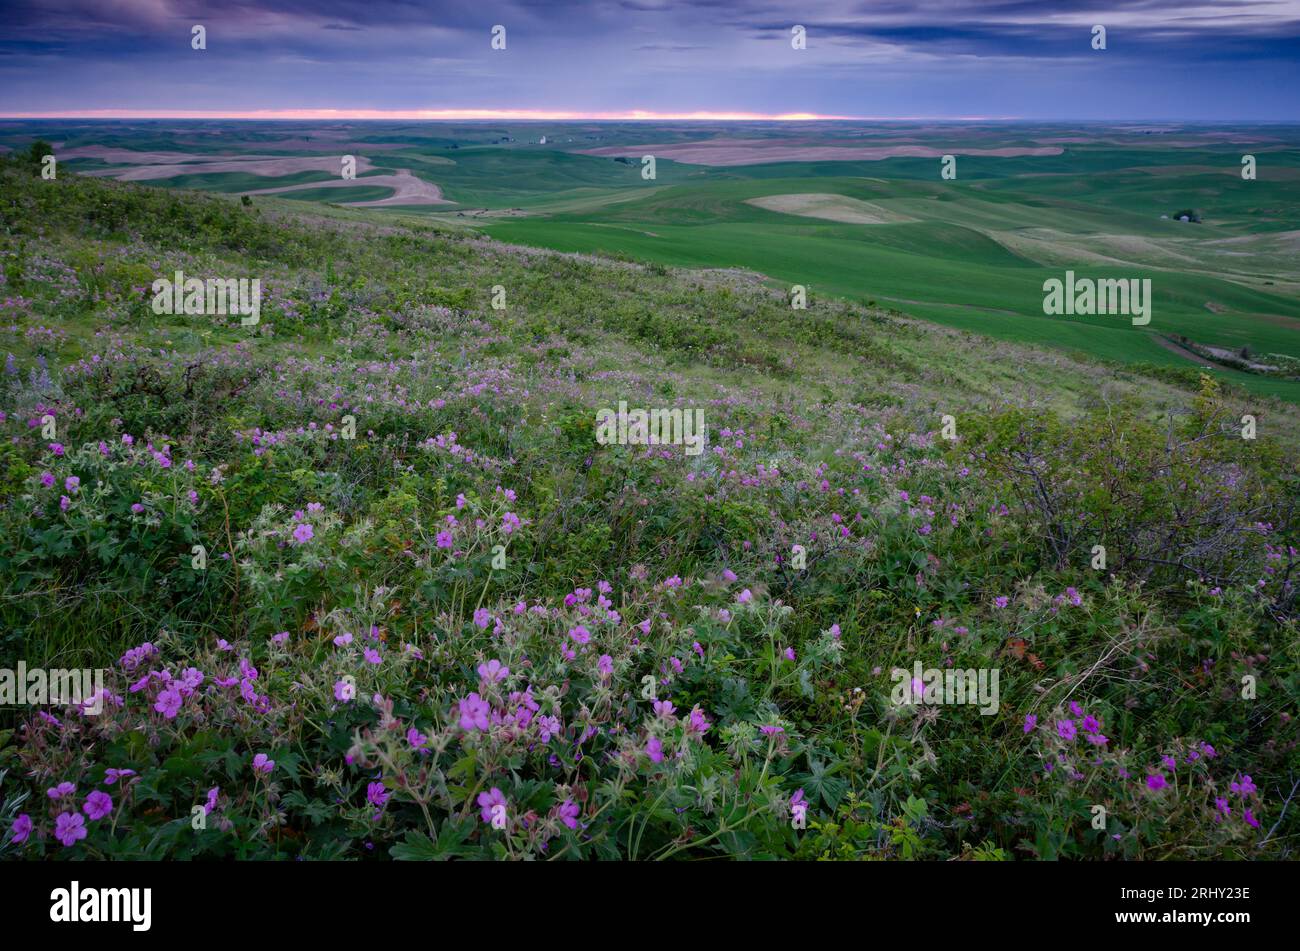 Palouse Prairie remnant with many species of grass and wildflowers including Geranium viscosissimum (Sticky Geranium) at sunset. Steptoe Butte State P Stock Photo